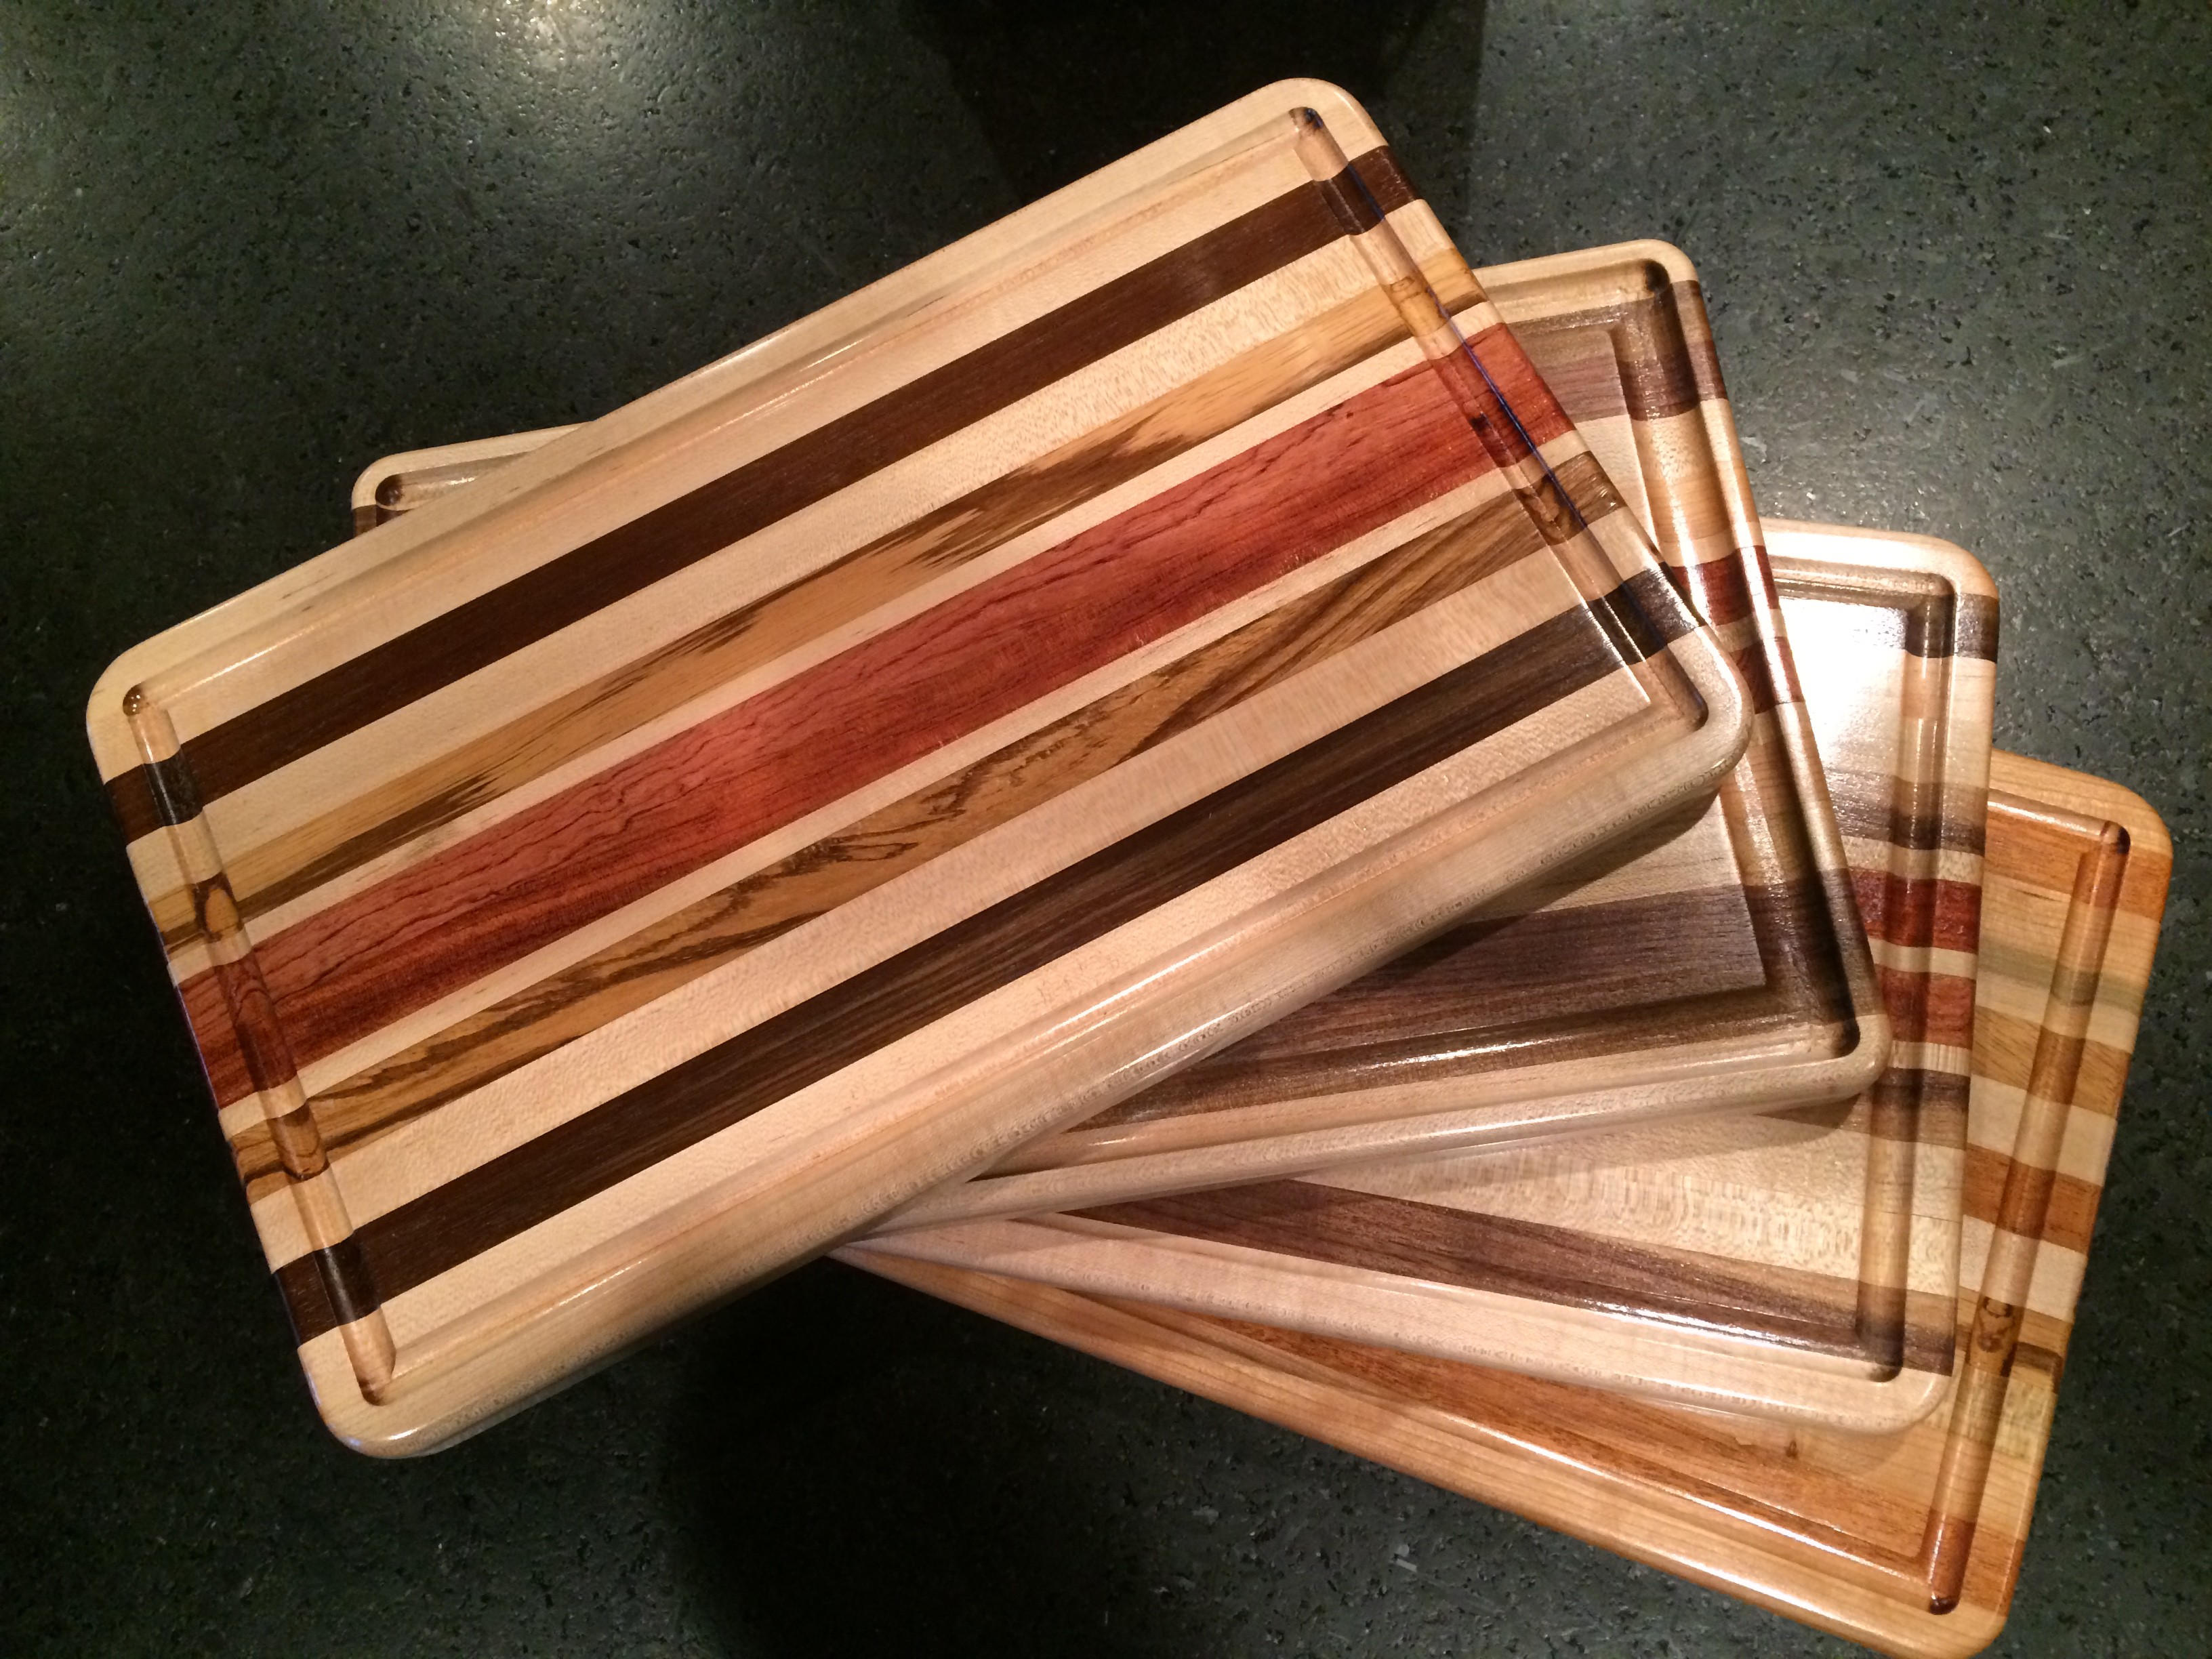 Zebrawood Thin Cutting Board Strips - Woodworkers Source